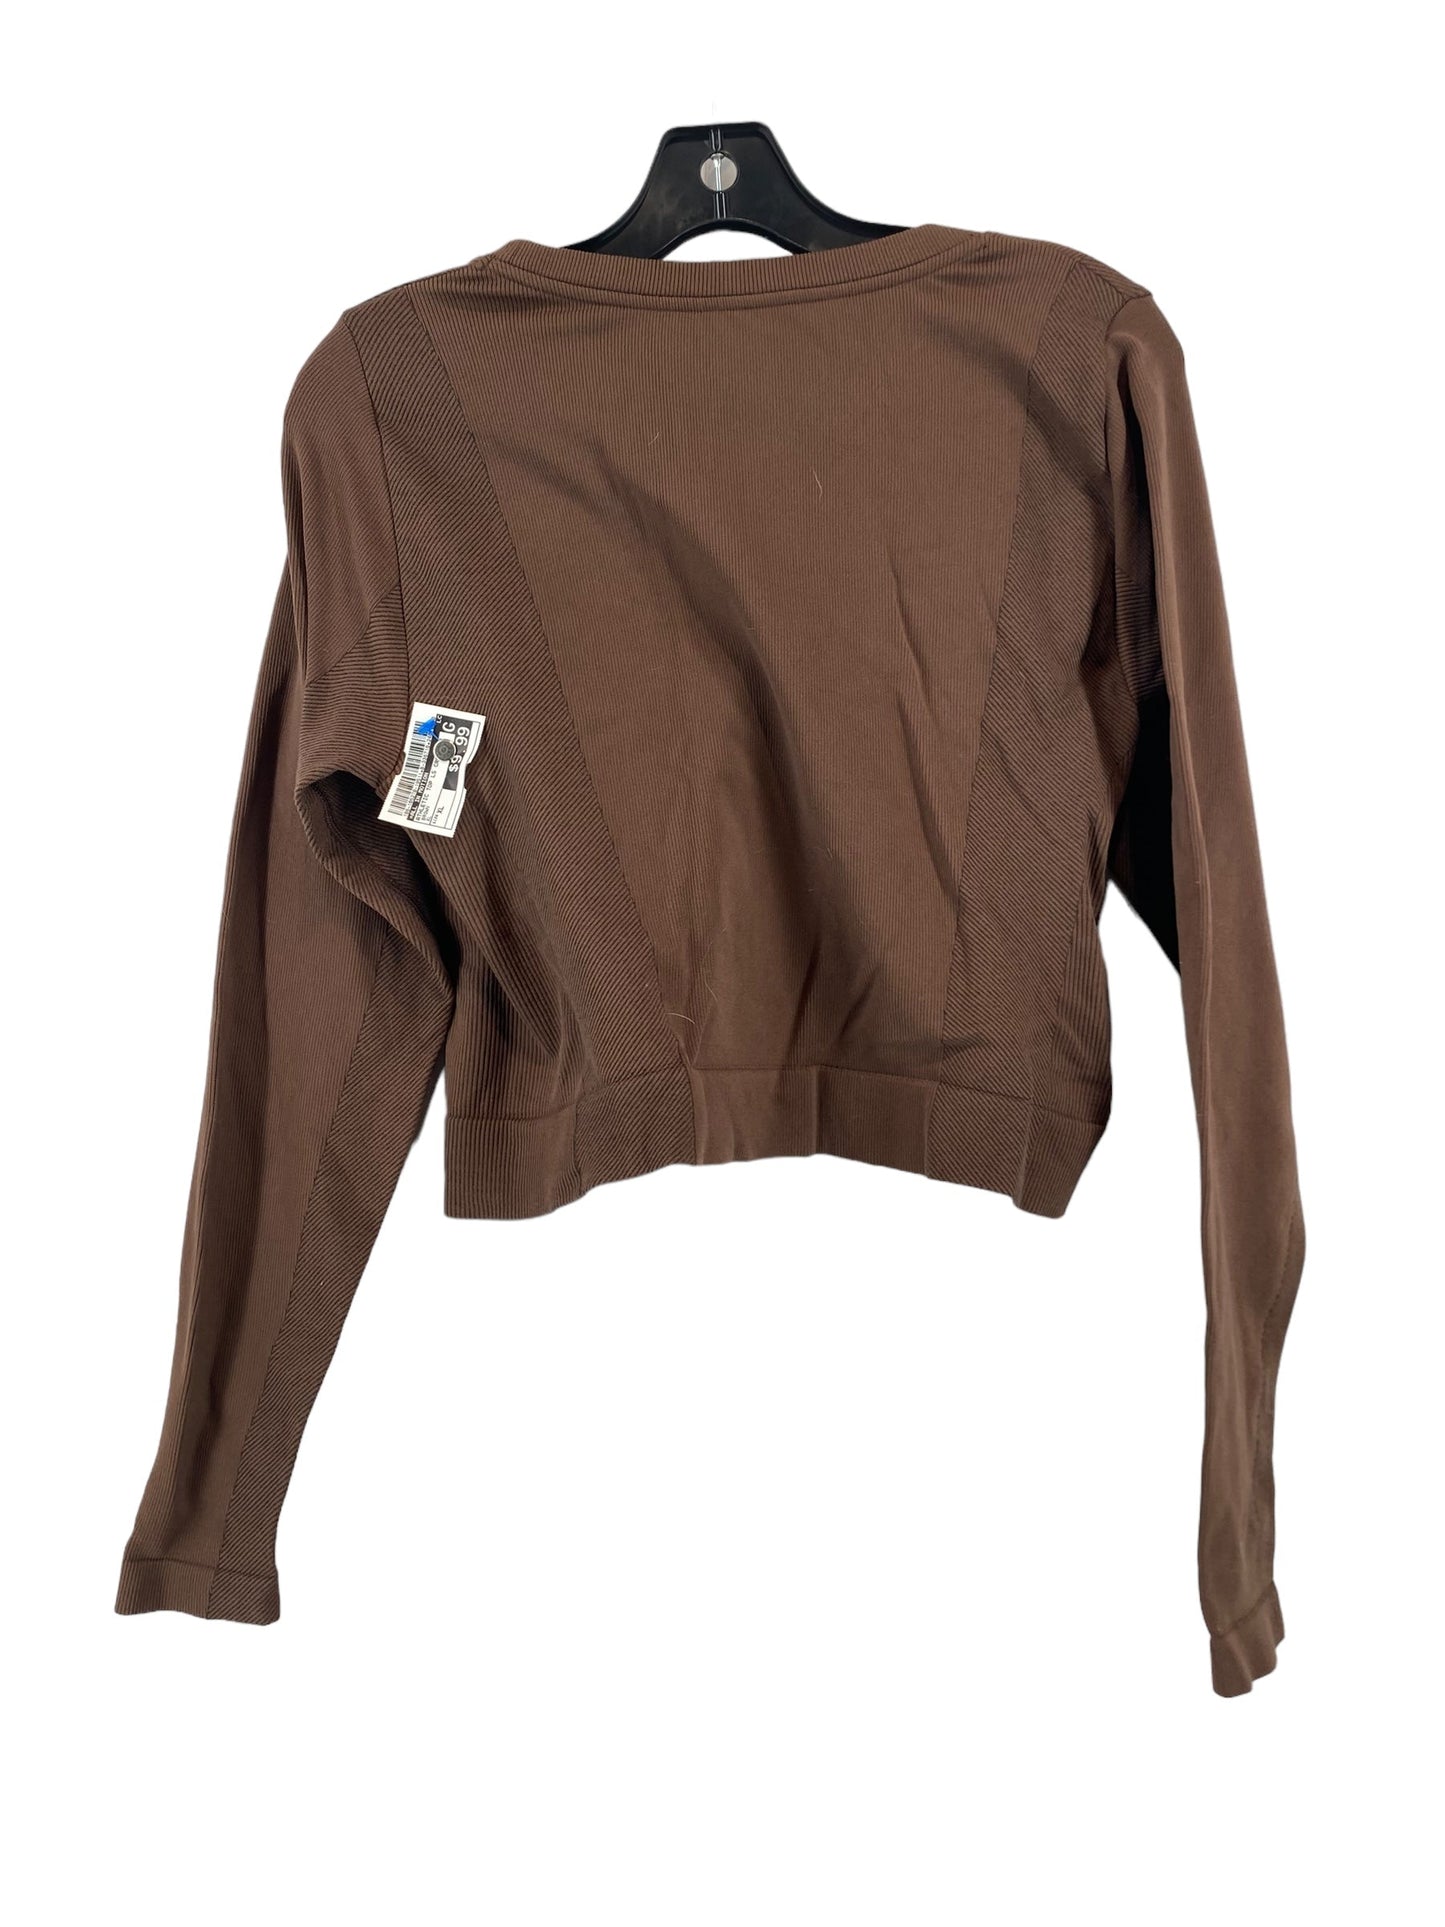 Brown Athletic Top Long Sleeve Crewneck All In Motion, Size Xl